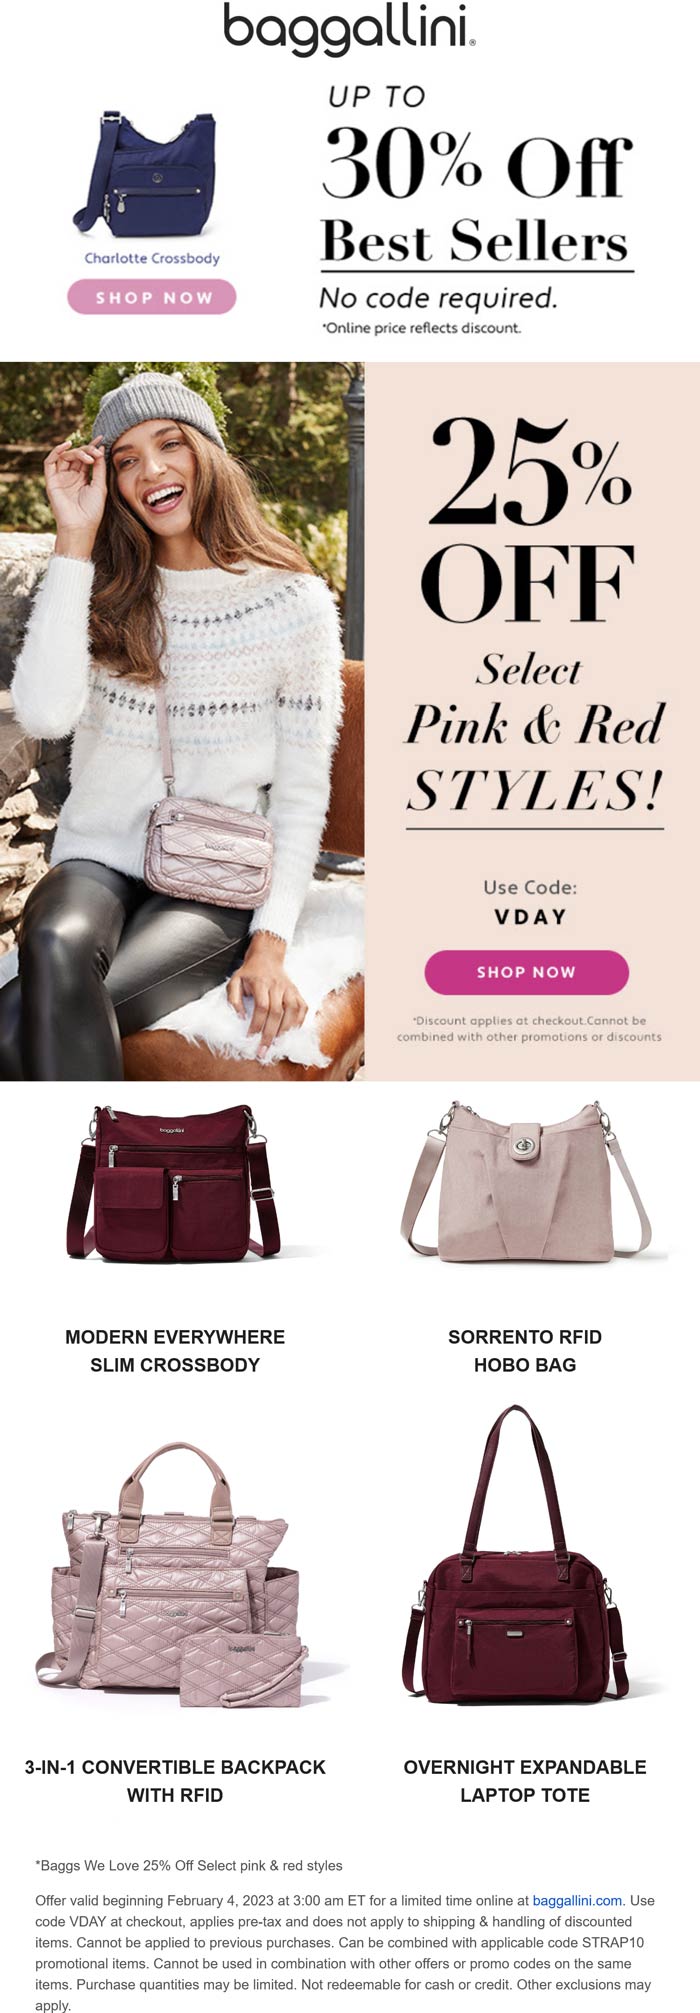 Baggallini stores Coupon  25% off pink & red styles at Baggallini via promo code VDAY #baggallini 